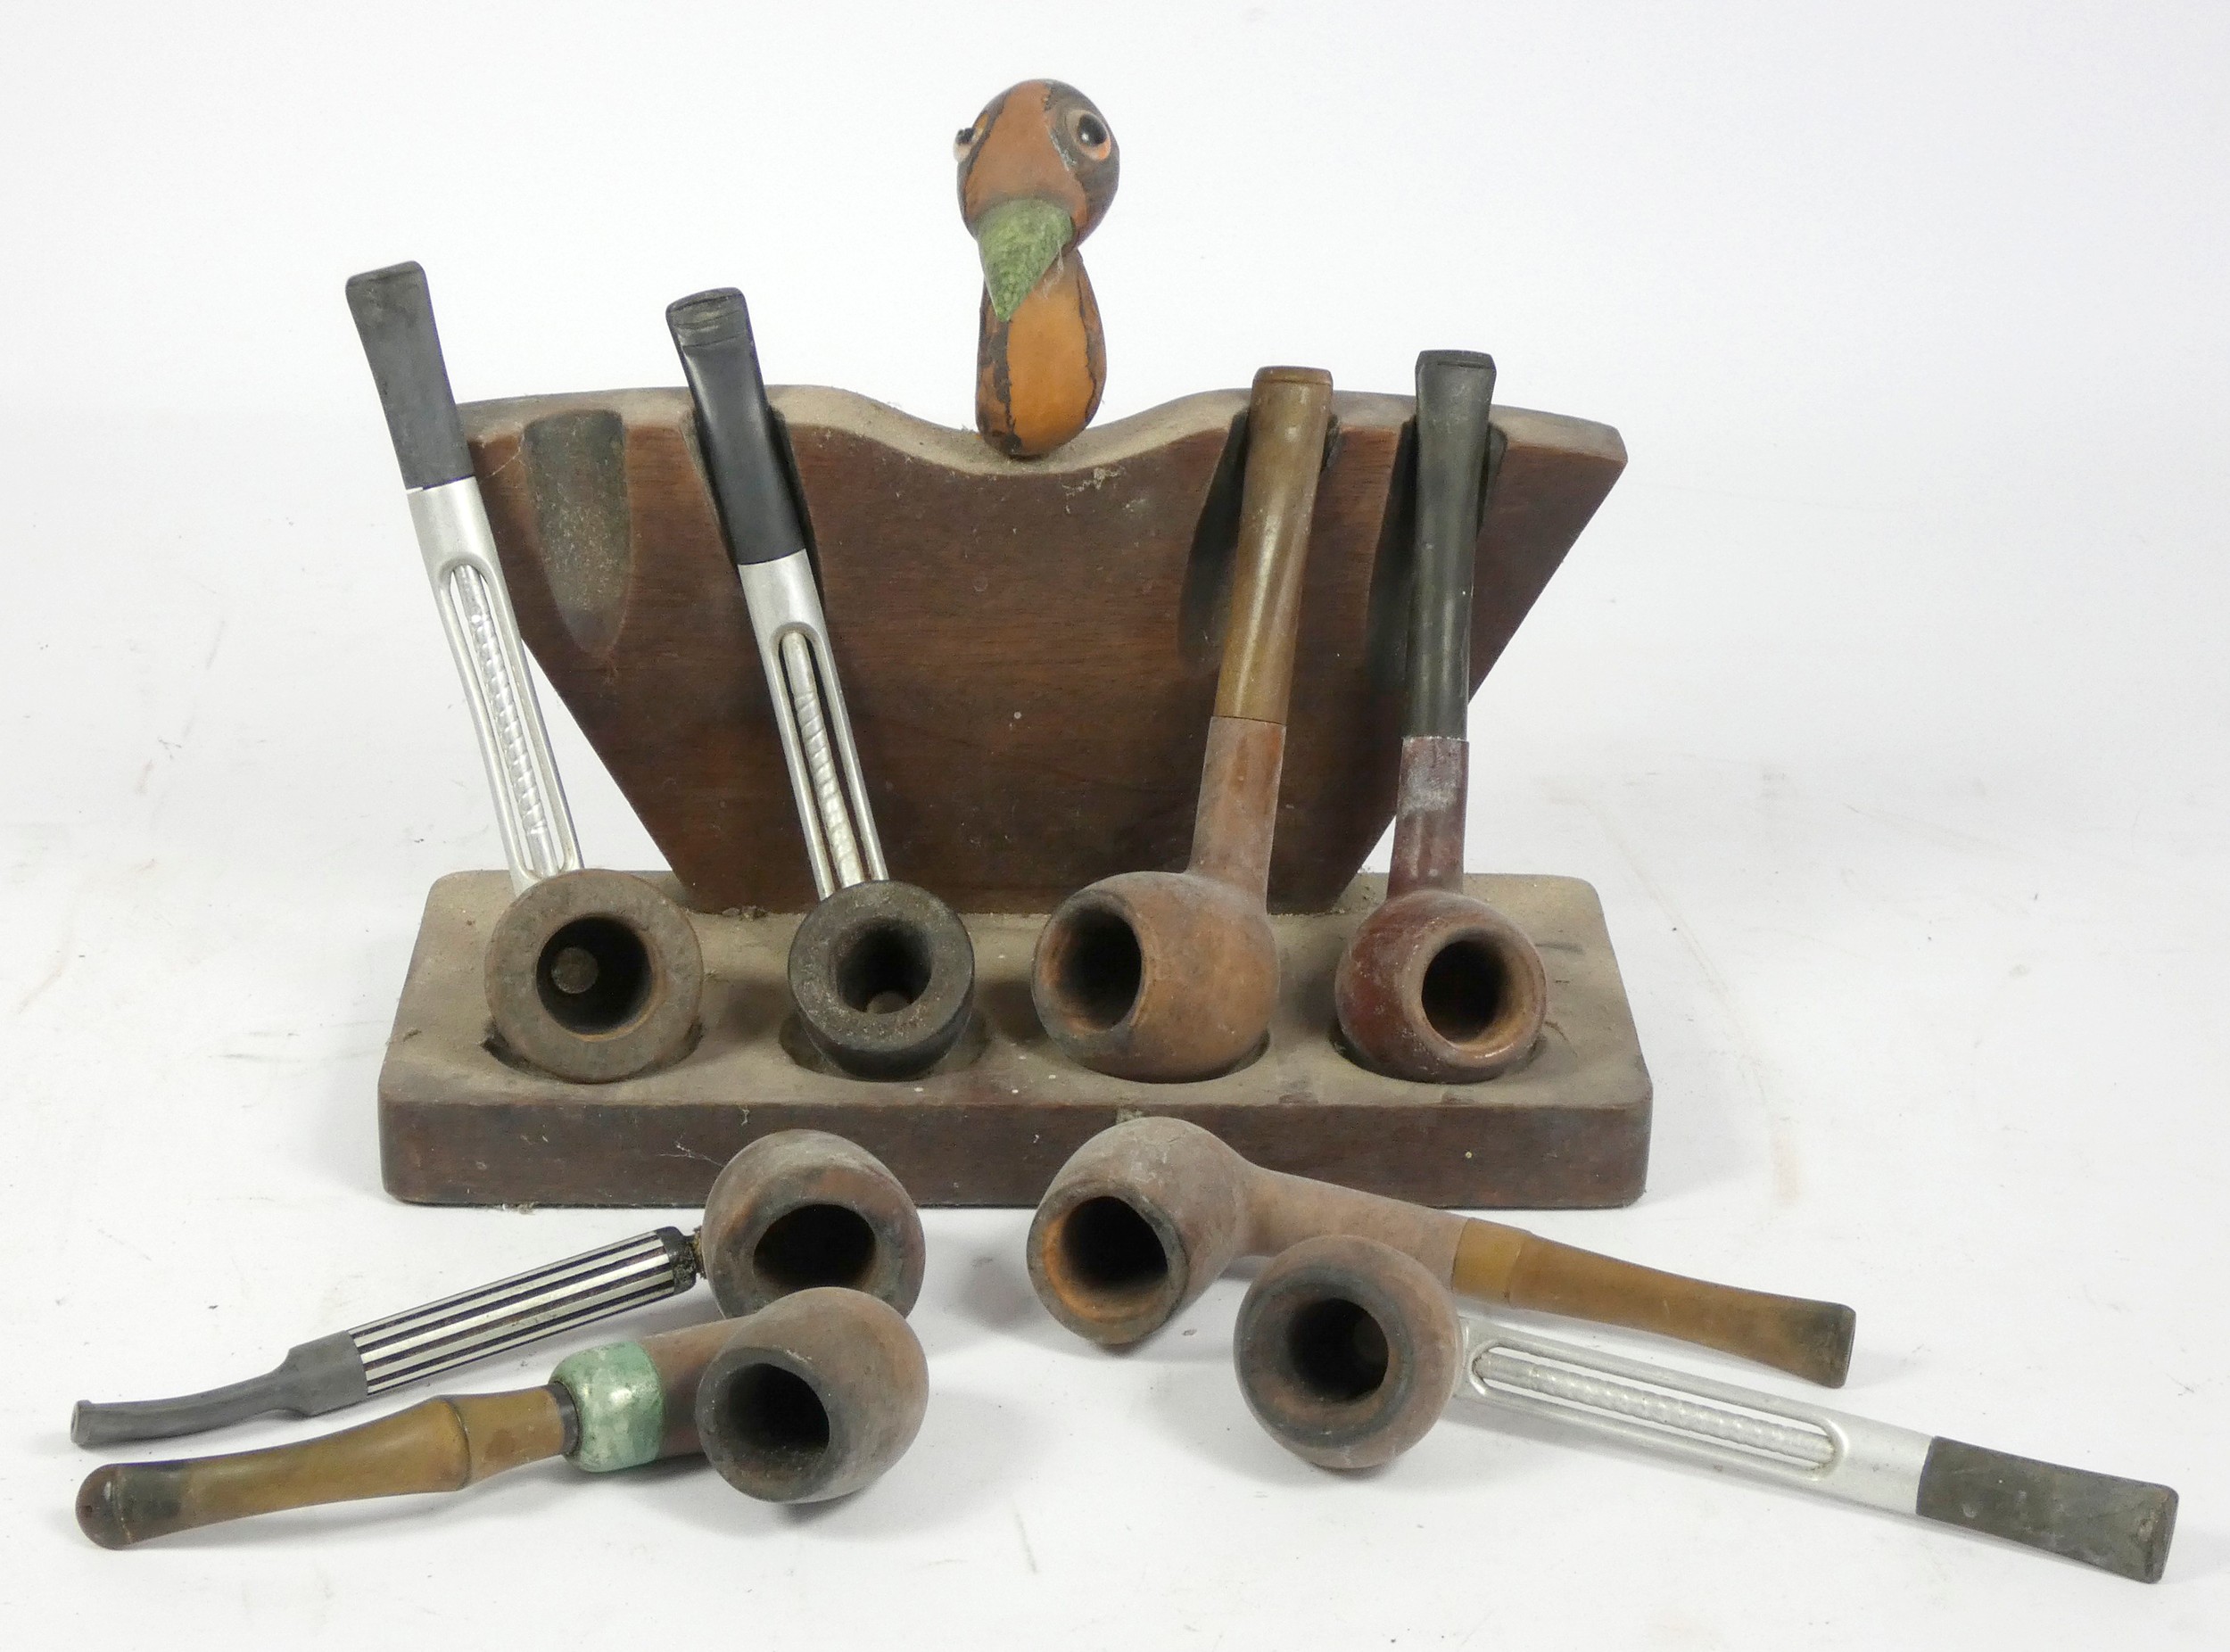 A collection of eight pipes, including brands such as Falcon, K & , Cool & Sweet and others, also - Image 2 of 2